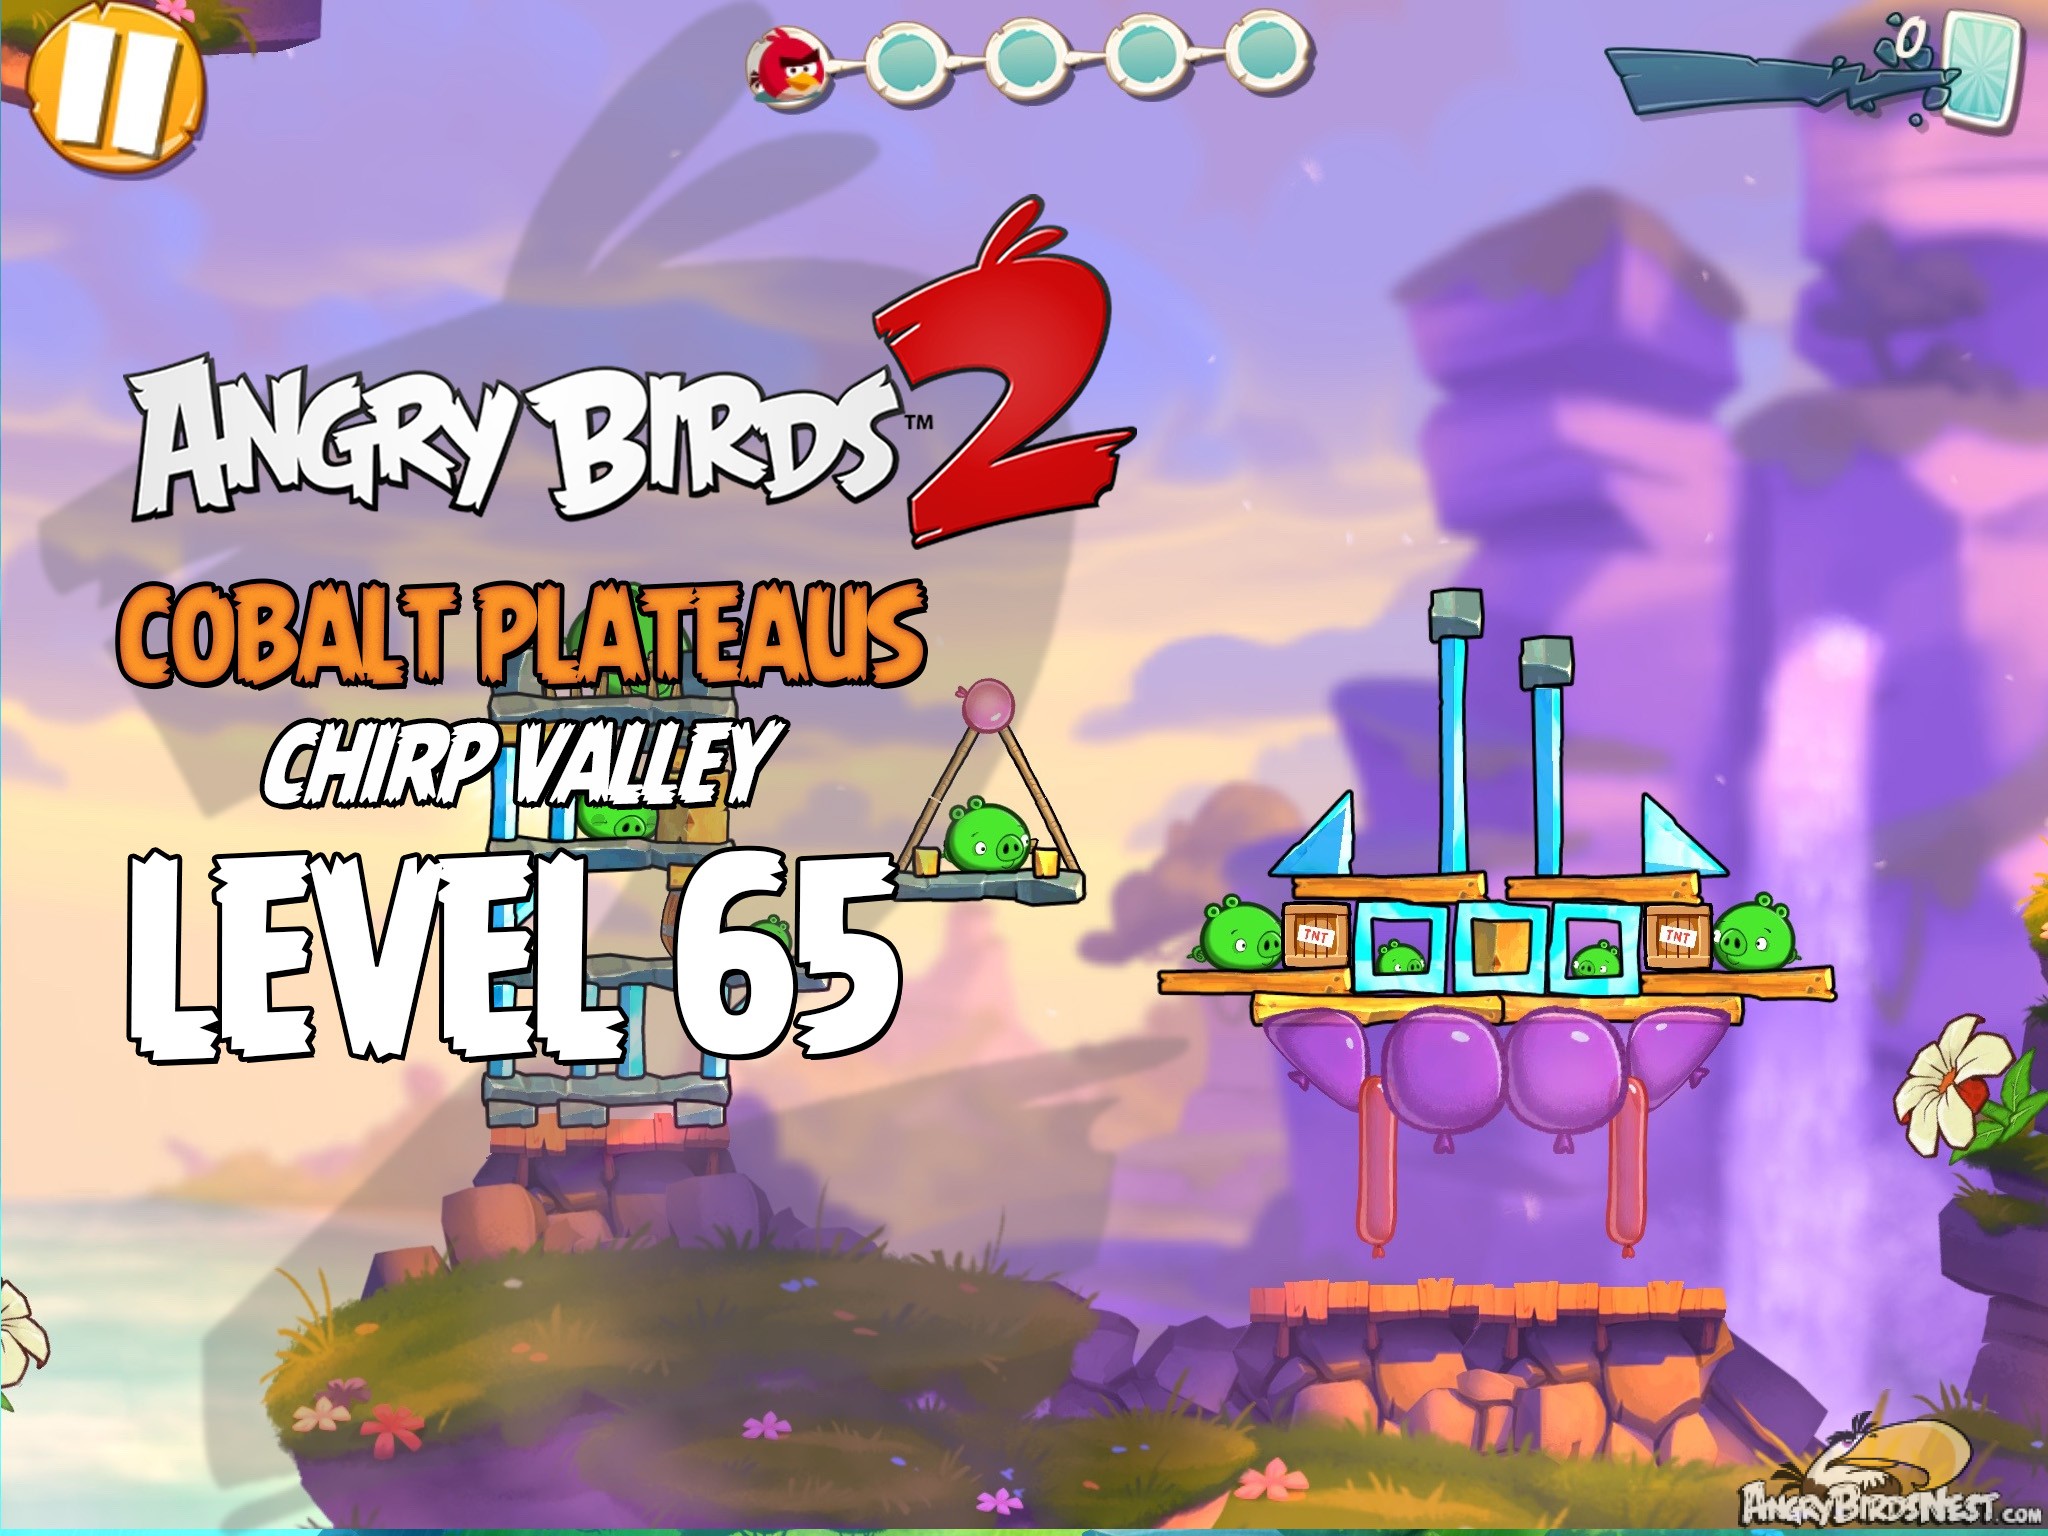 Angry Birds 2 Cobalt Plateaus Chirp Valley Level 65